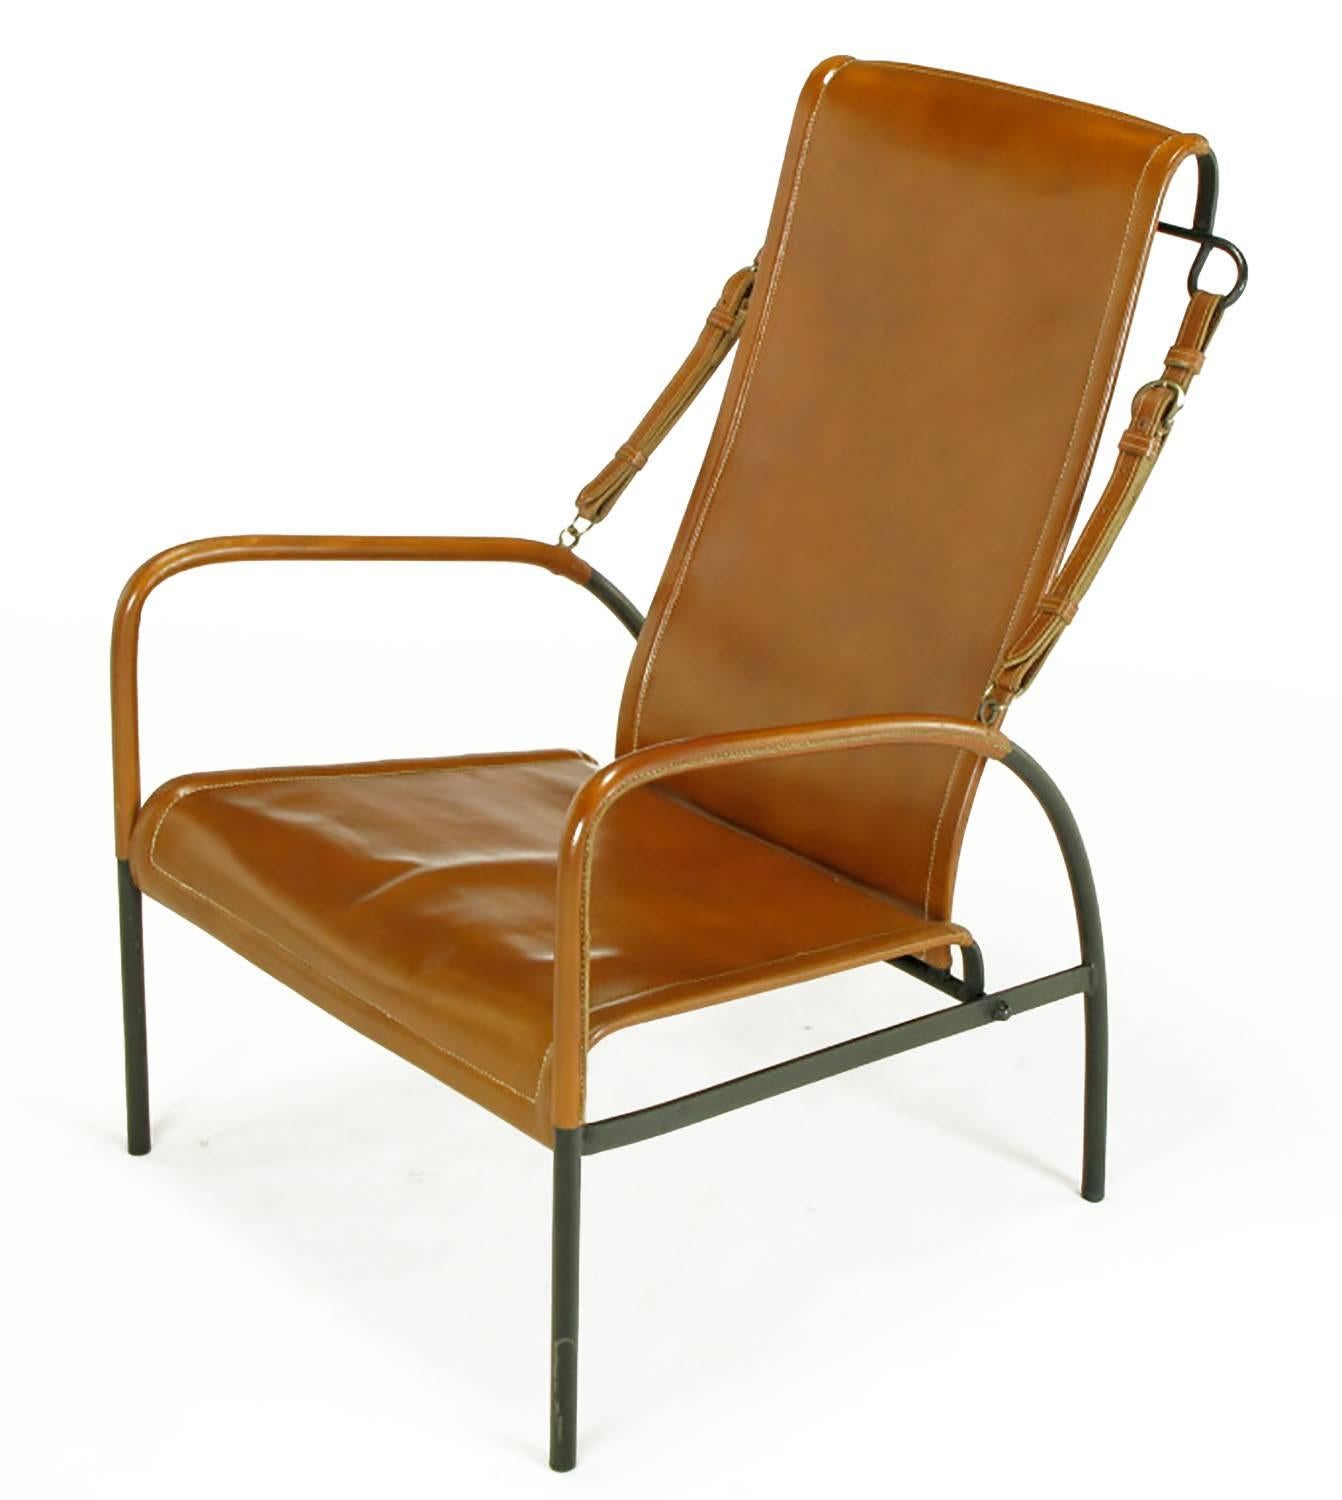 Mid-20th Century Pair of Custom Leather and Wrought Iron Lounge Chairs after Jacques Adnet